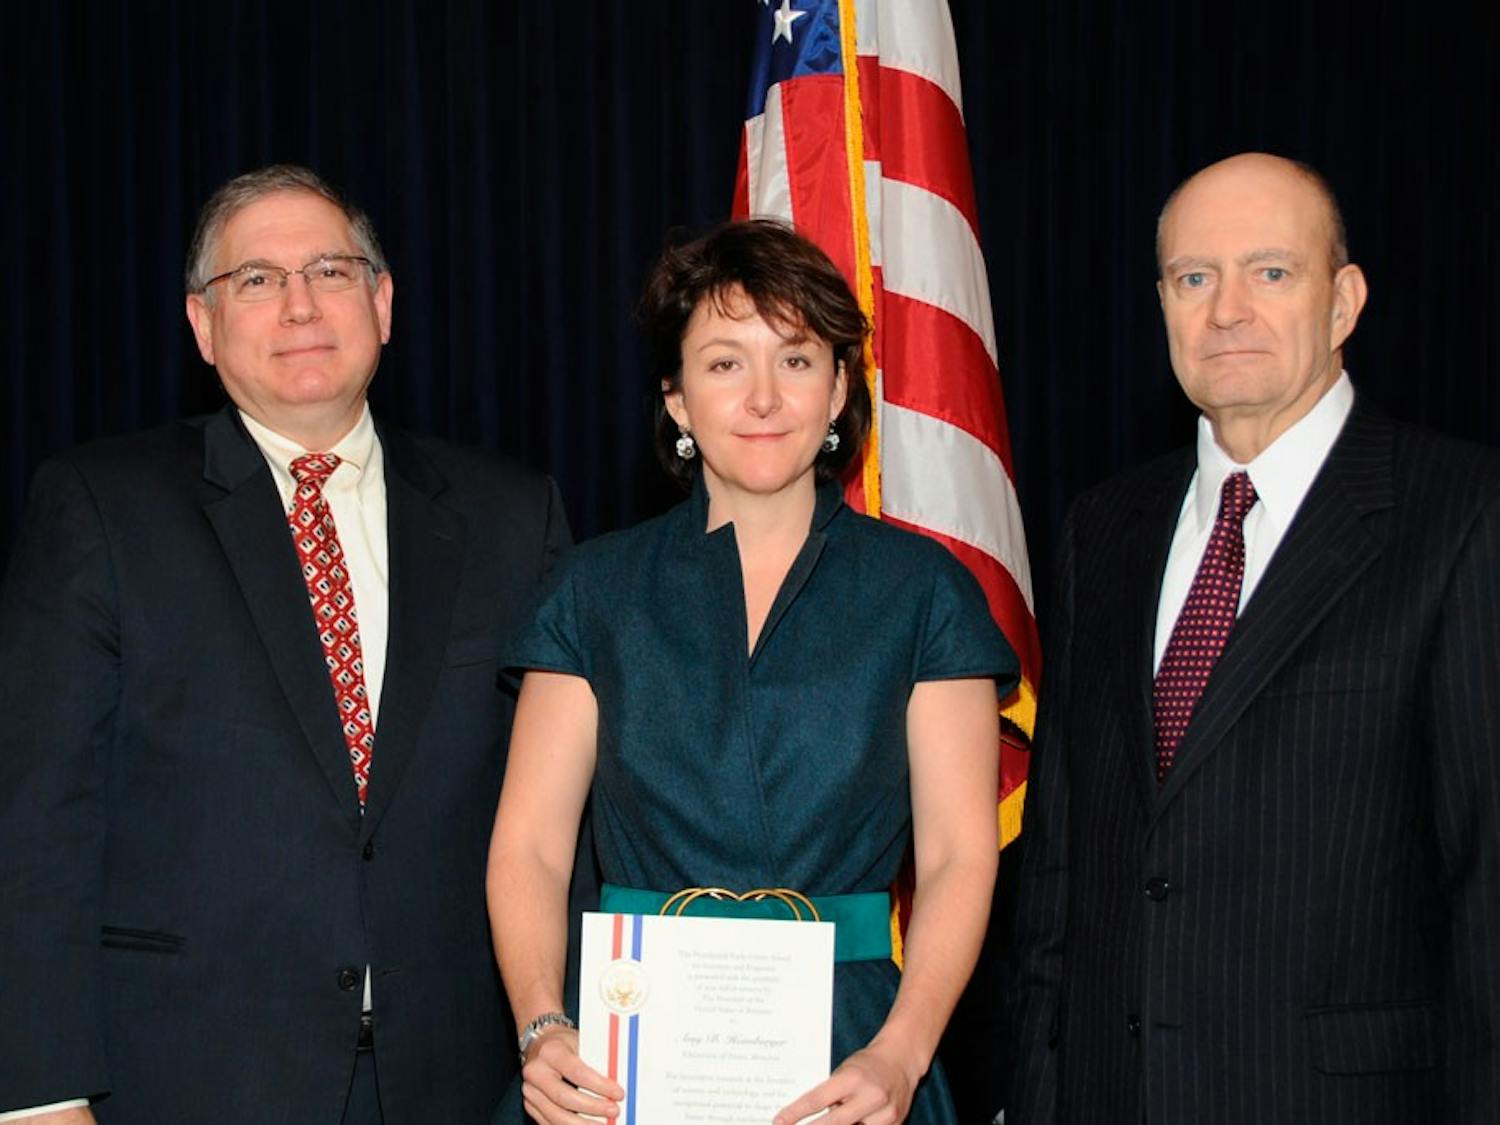 Lawrence Tabak (left) and Amy Heimberger (middle) pose for a photo in 2007.